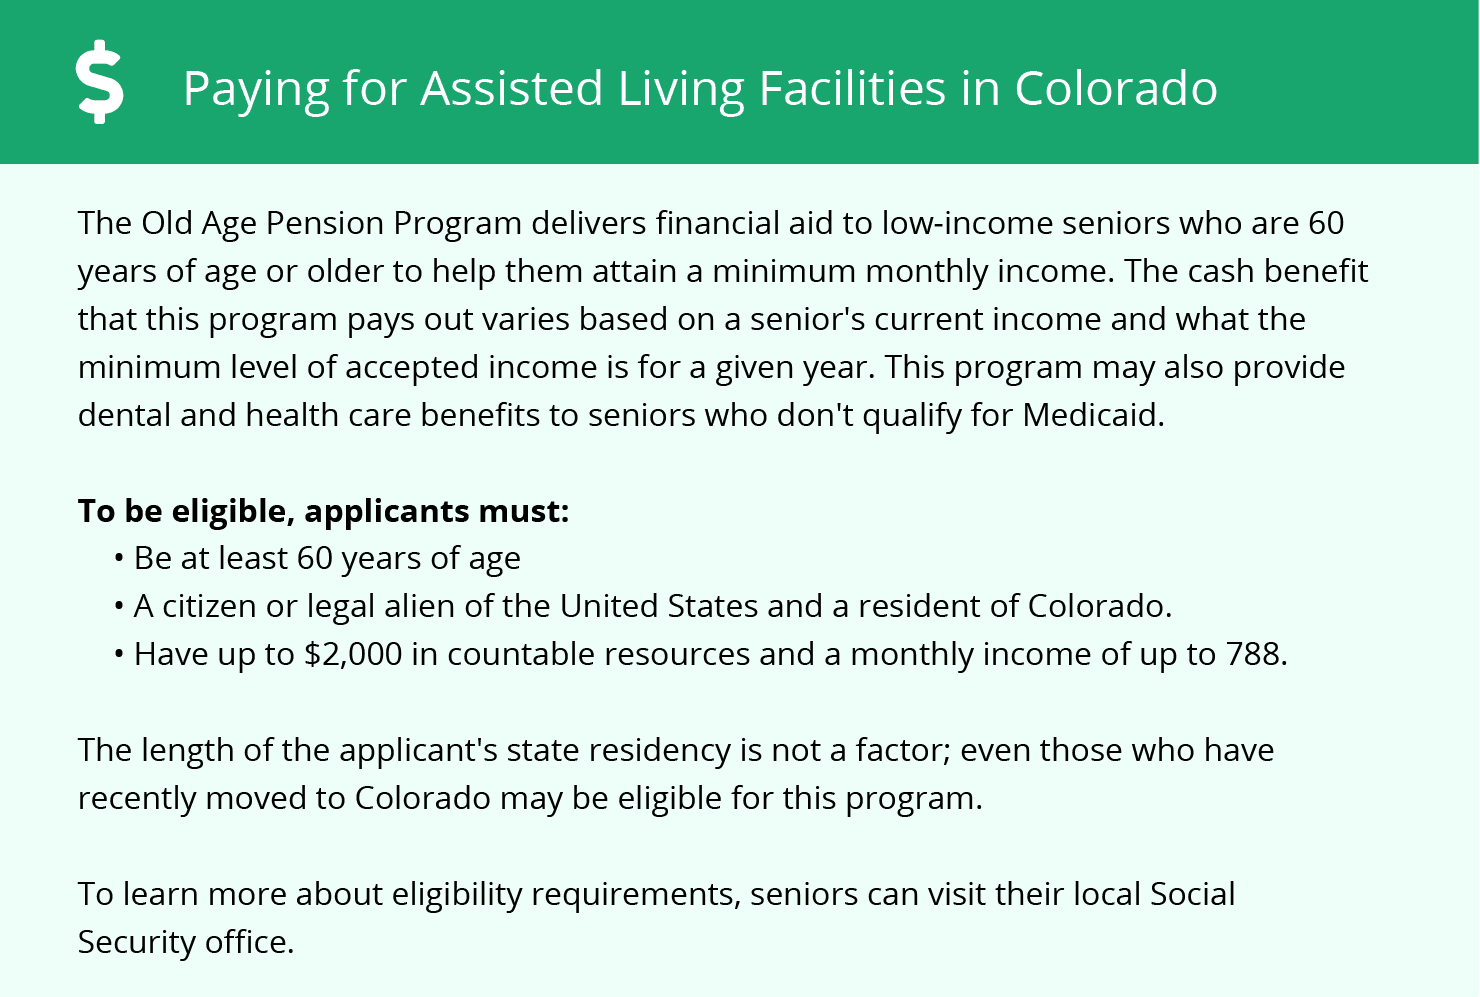 Paying for Assisted Living Facilities in Colorado